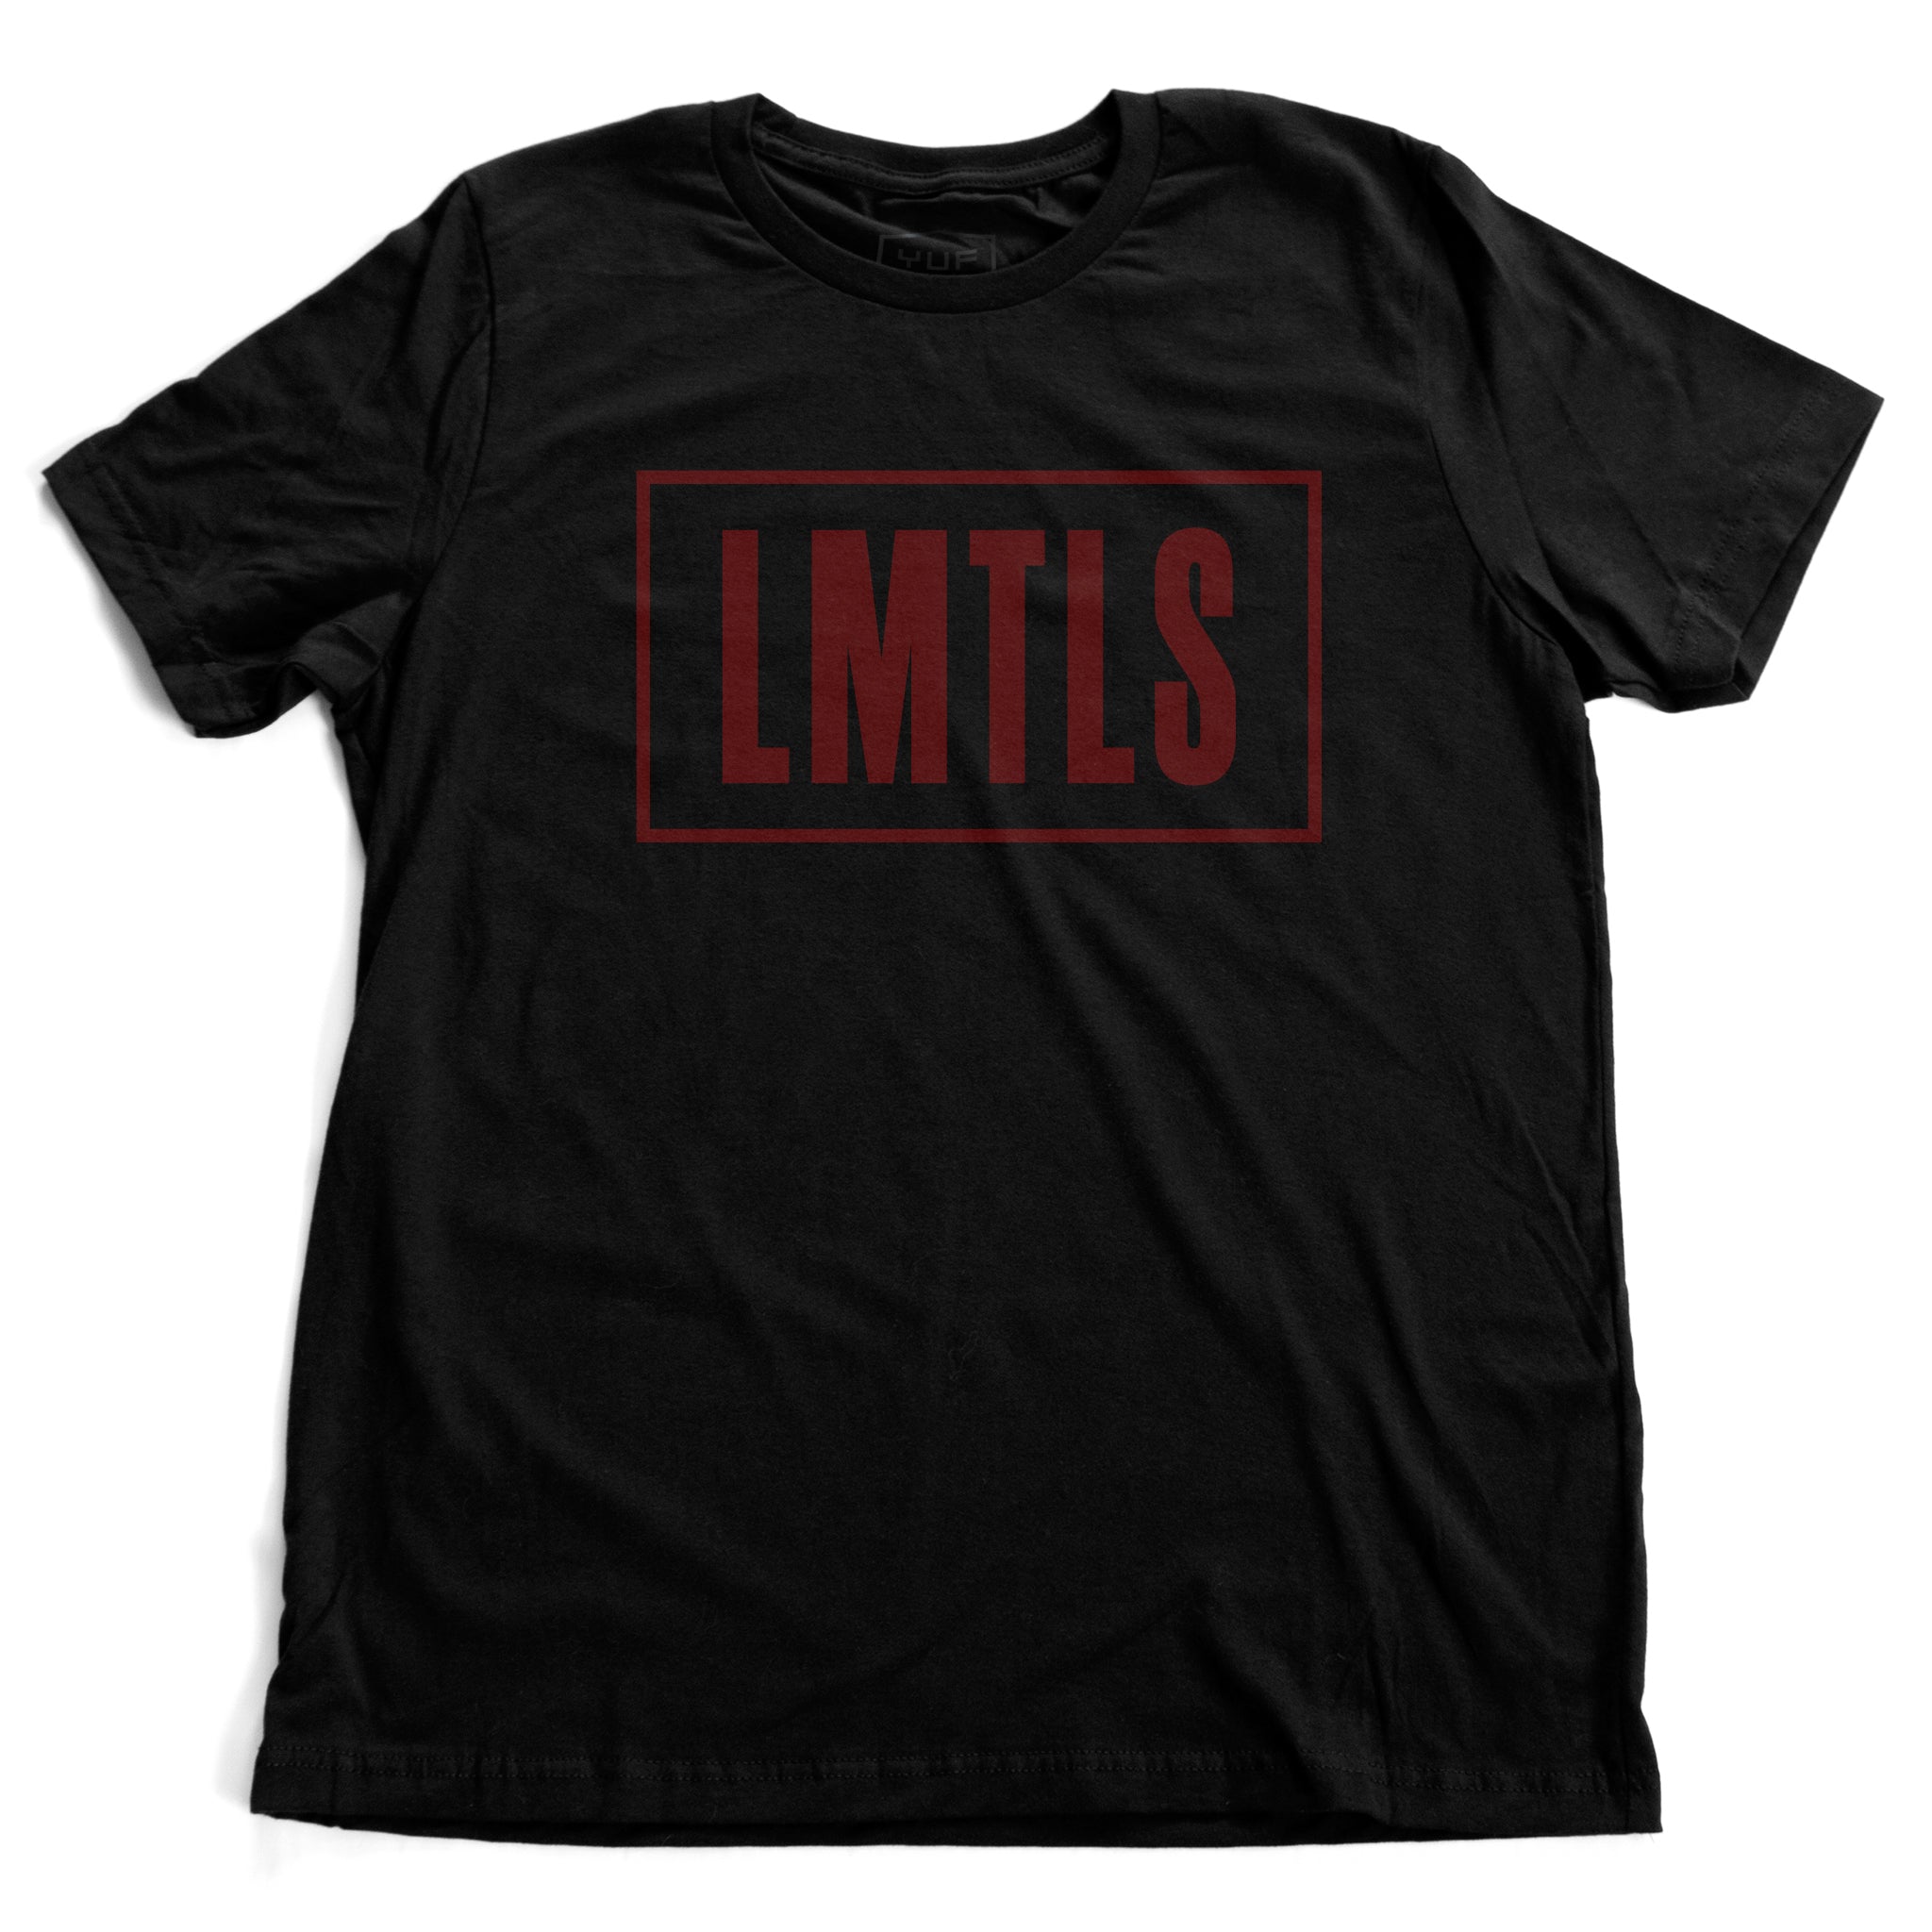 An inspirational, motivational graphic t-shirt in Black, with the typographic treatment LMTLS, representing a “limitless” lifestyle. On the back of the shirt is the number 10, as in a 10 out of 10, perfect score. By fashion brand YUF, from wolfsaint.net